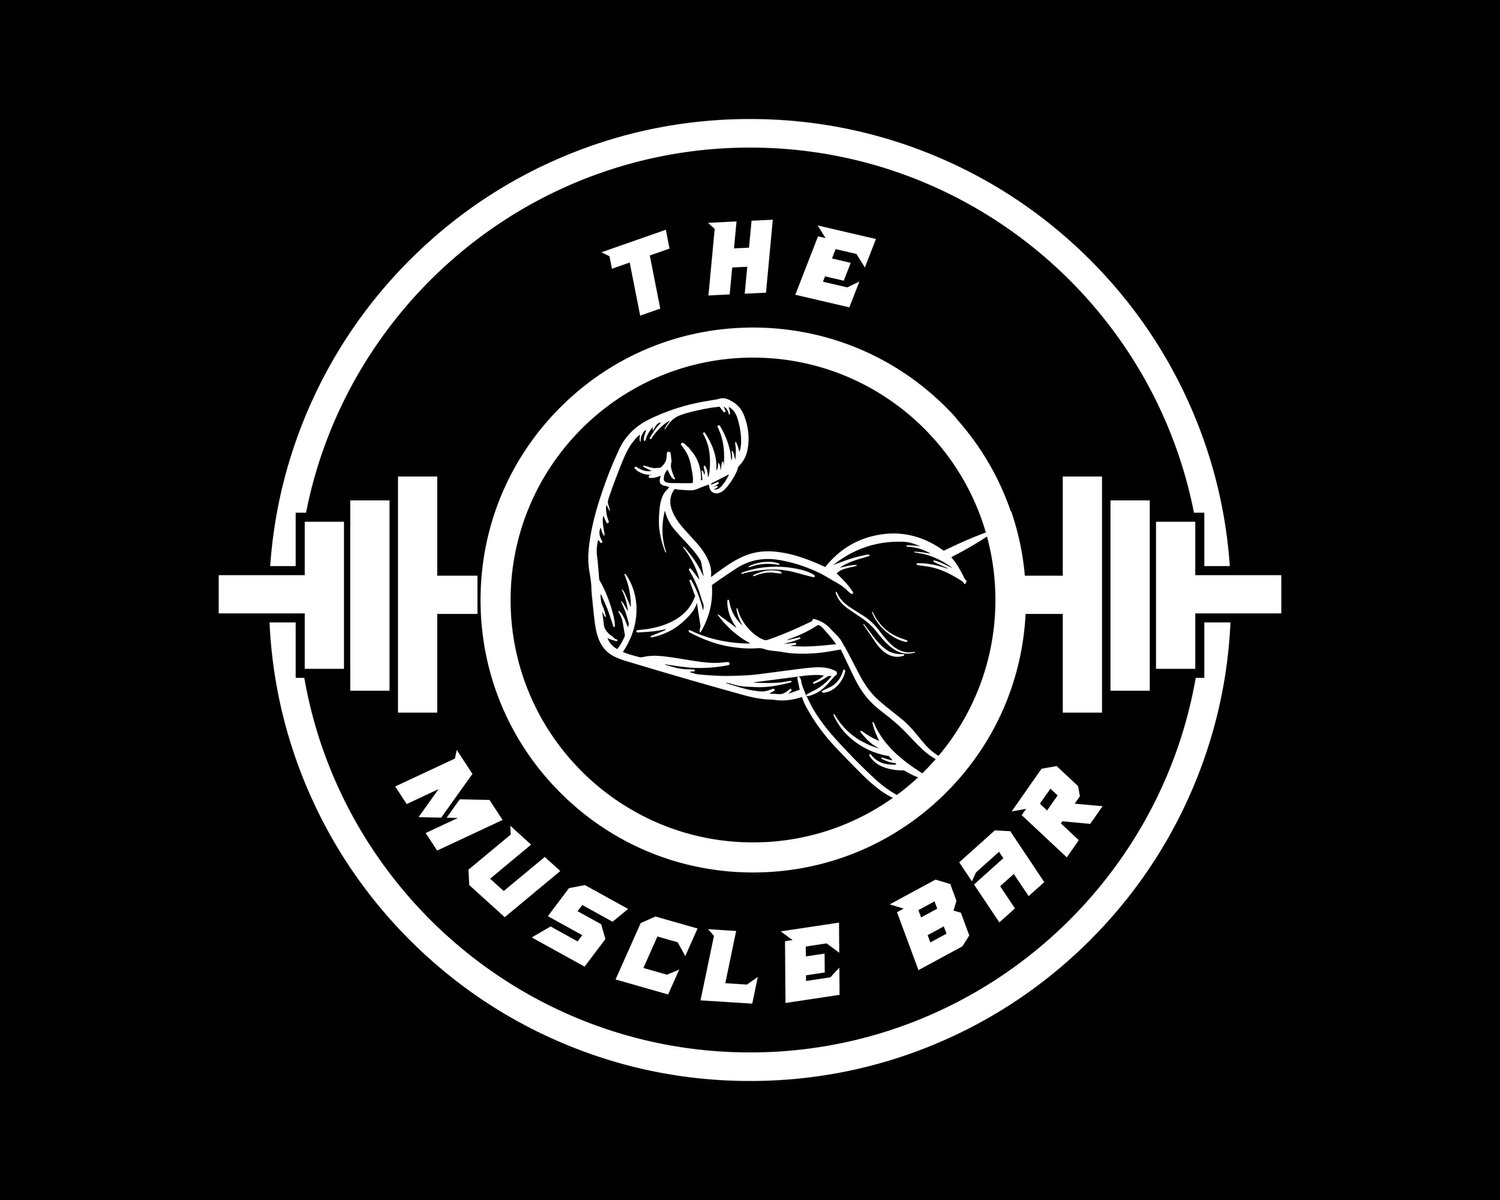 The Muscle Bar